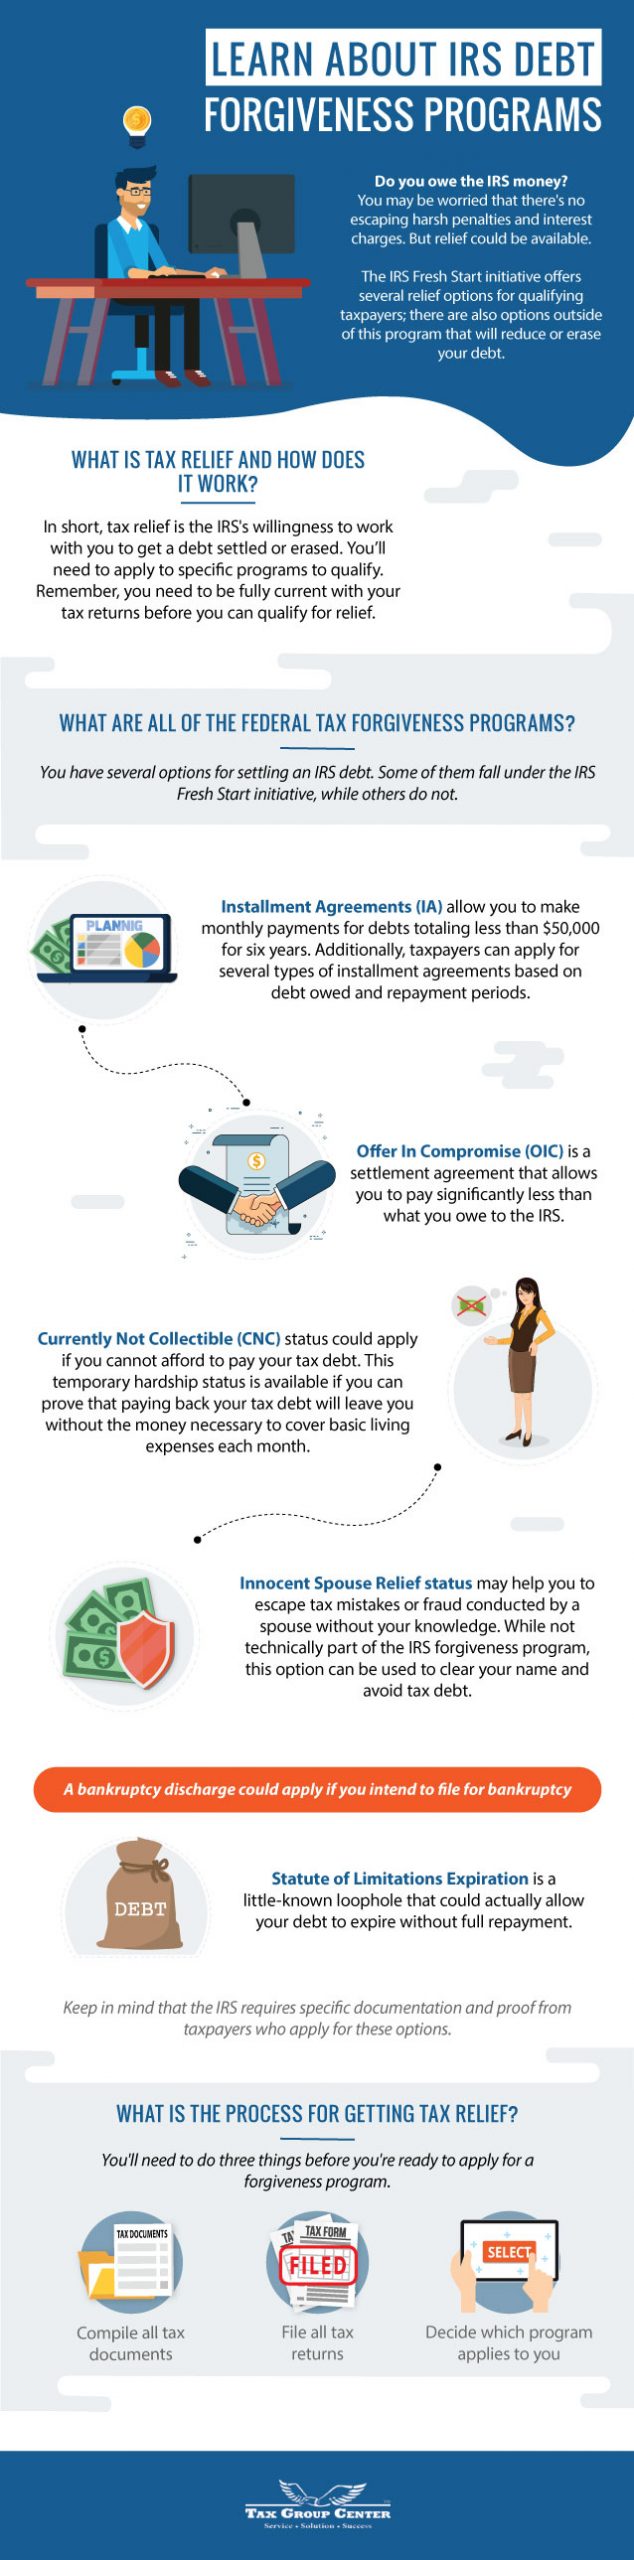 Learn About IRS Debt Programs [Infographic] Tax Group Center